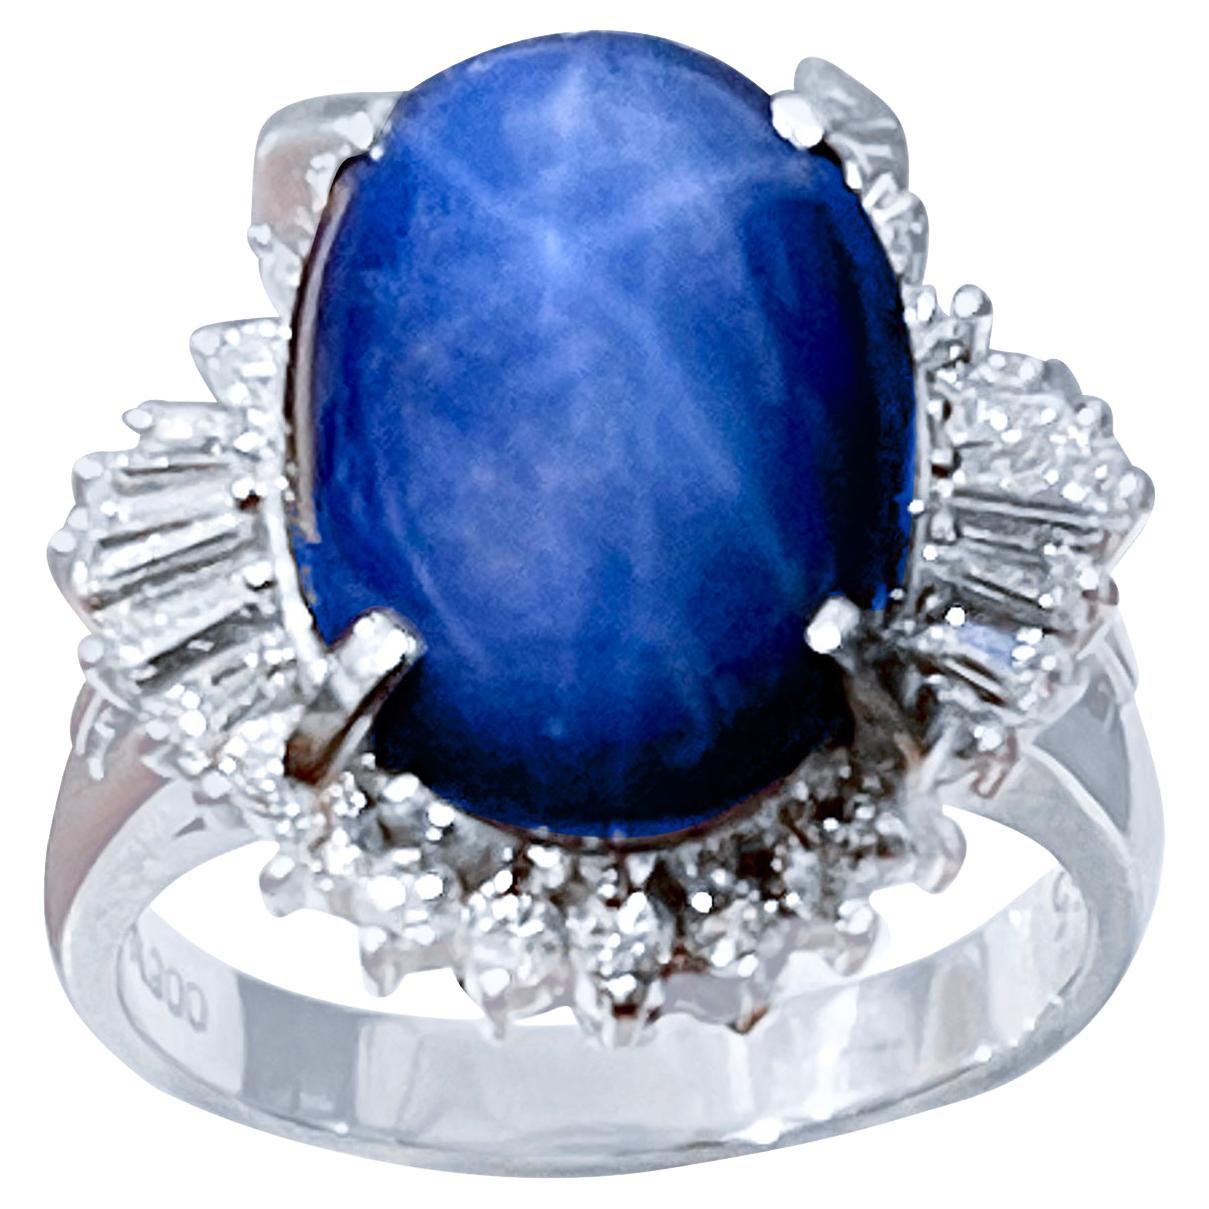 8.12 Ct Natural Star Sapphire Cabochon Ring in Platinum